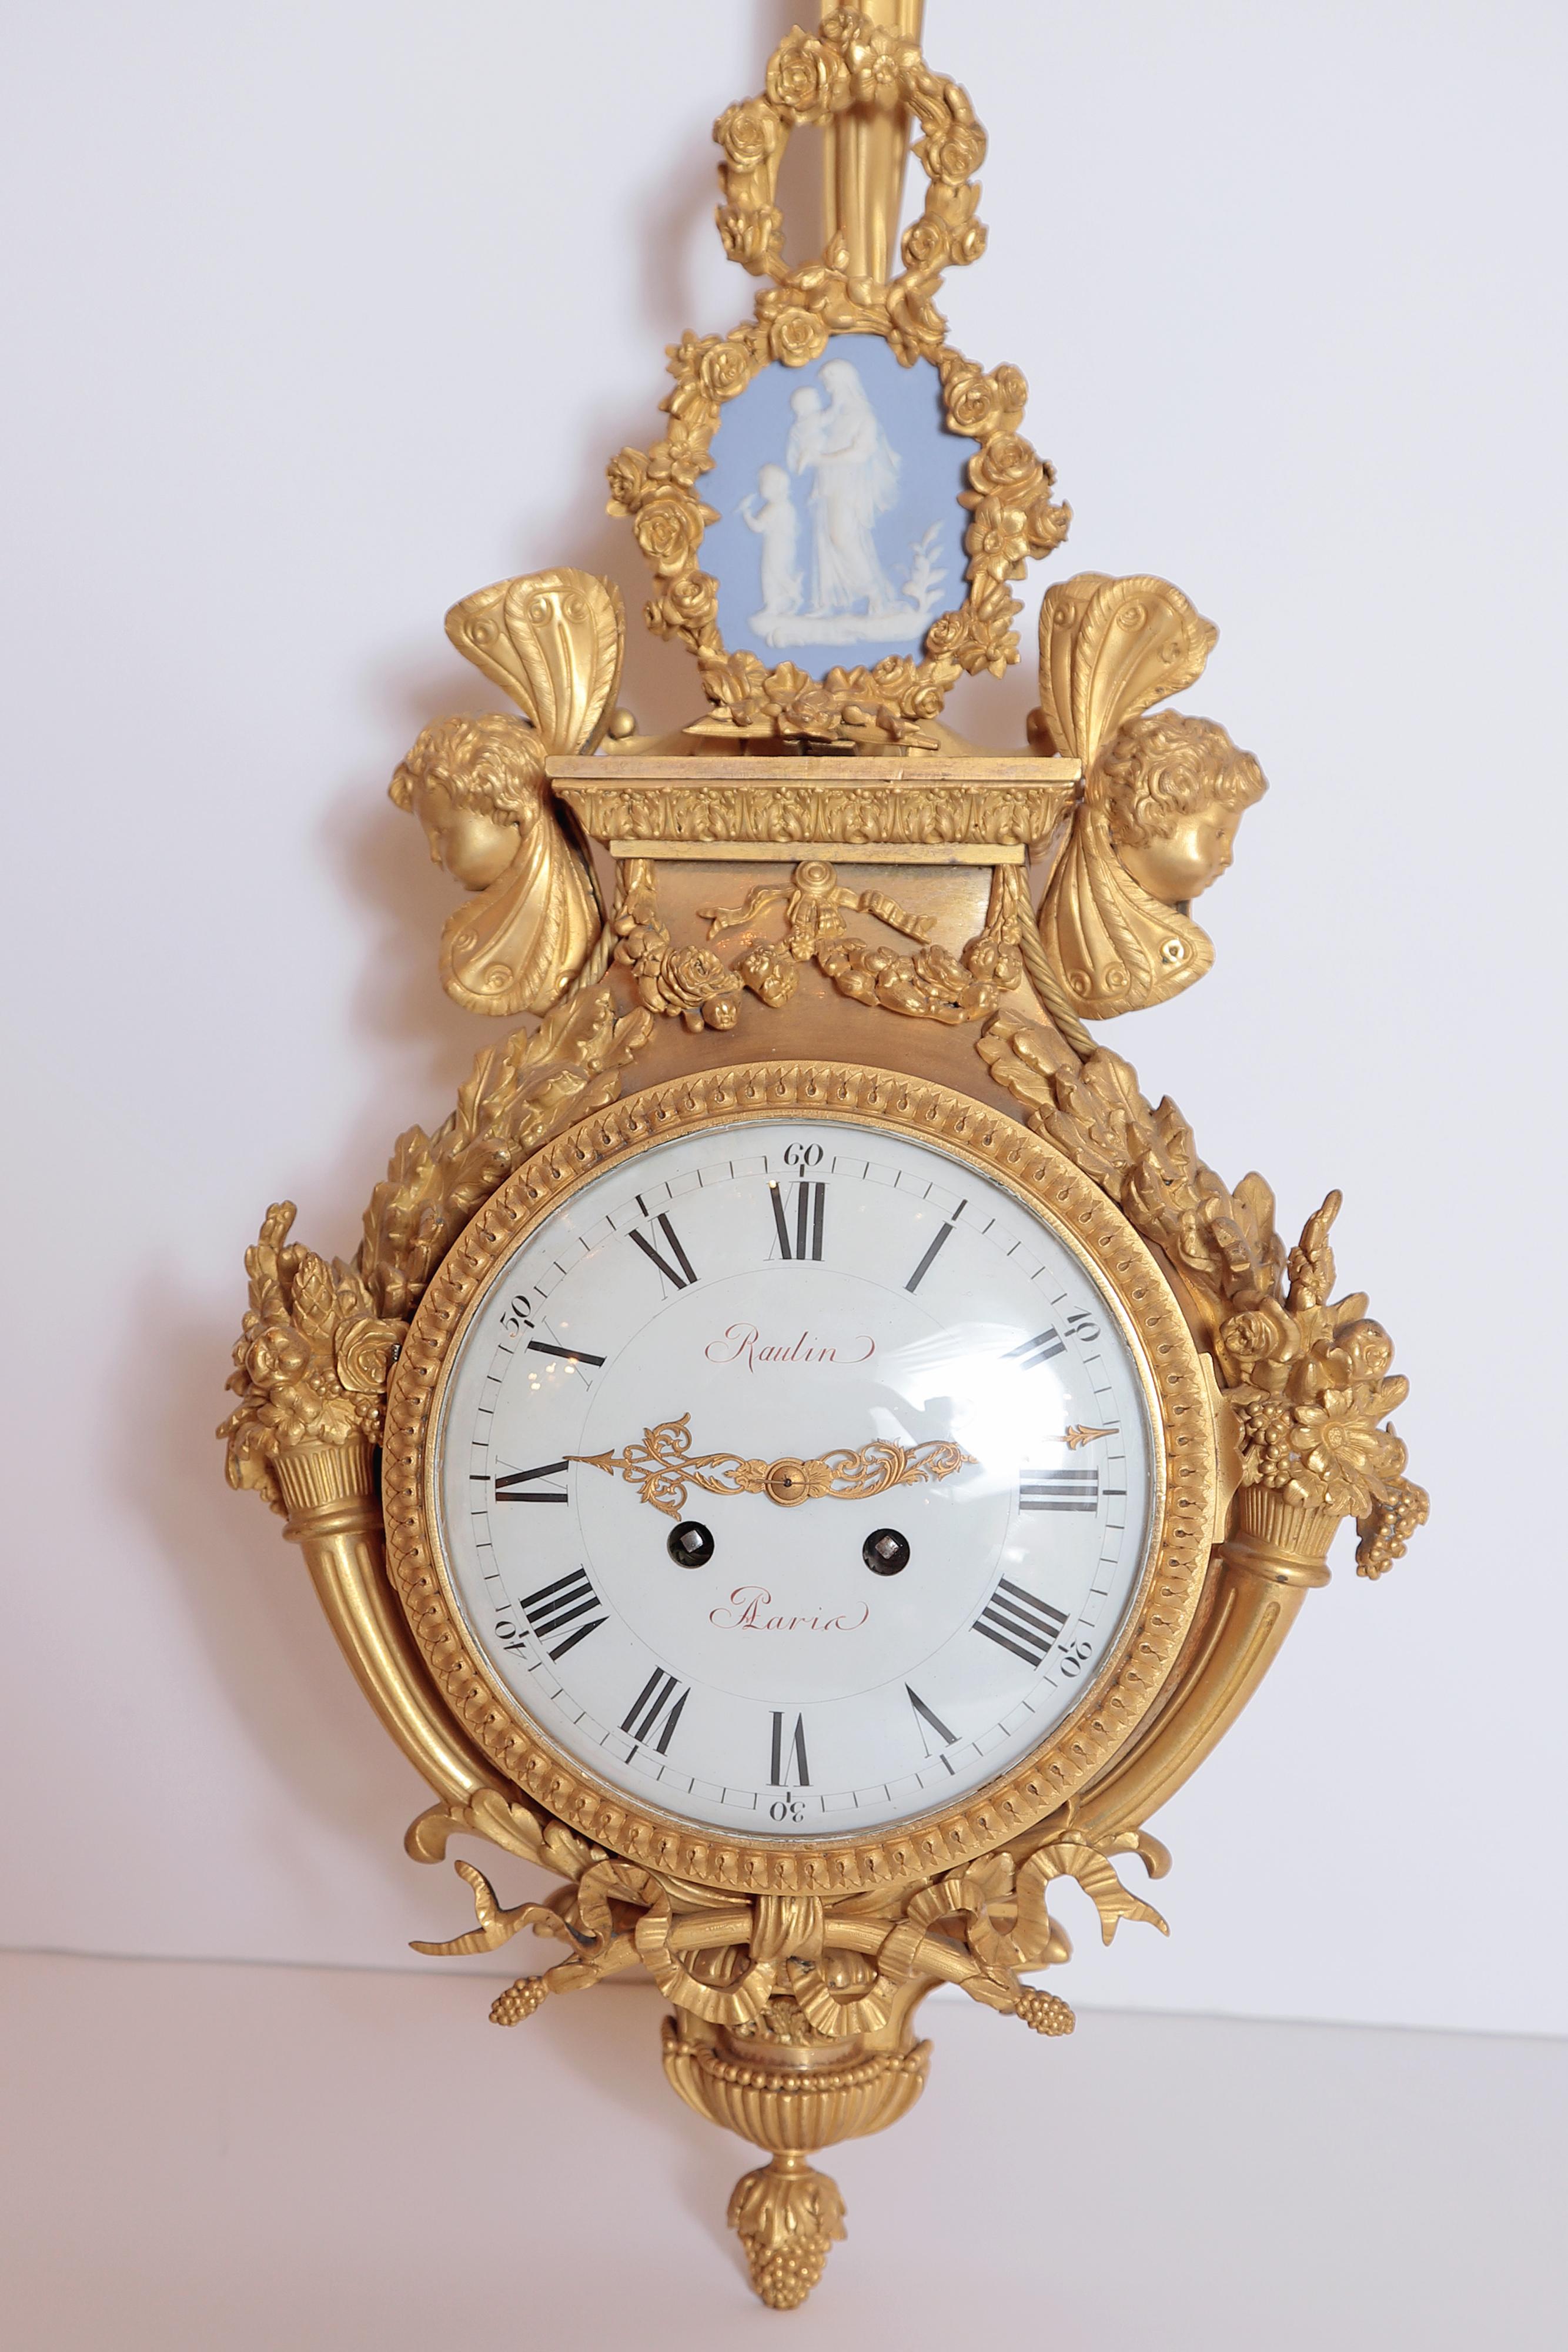 Finest 19th century French gilt bronze and Wedgewood plaques clock and barometer signed Victor Raulin. Fine gilt bronze winged female heads and light blue jasper plaques.